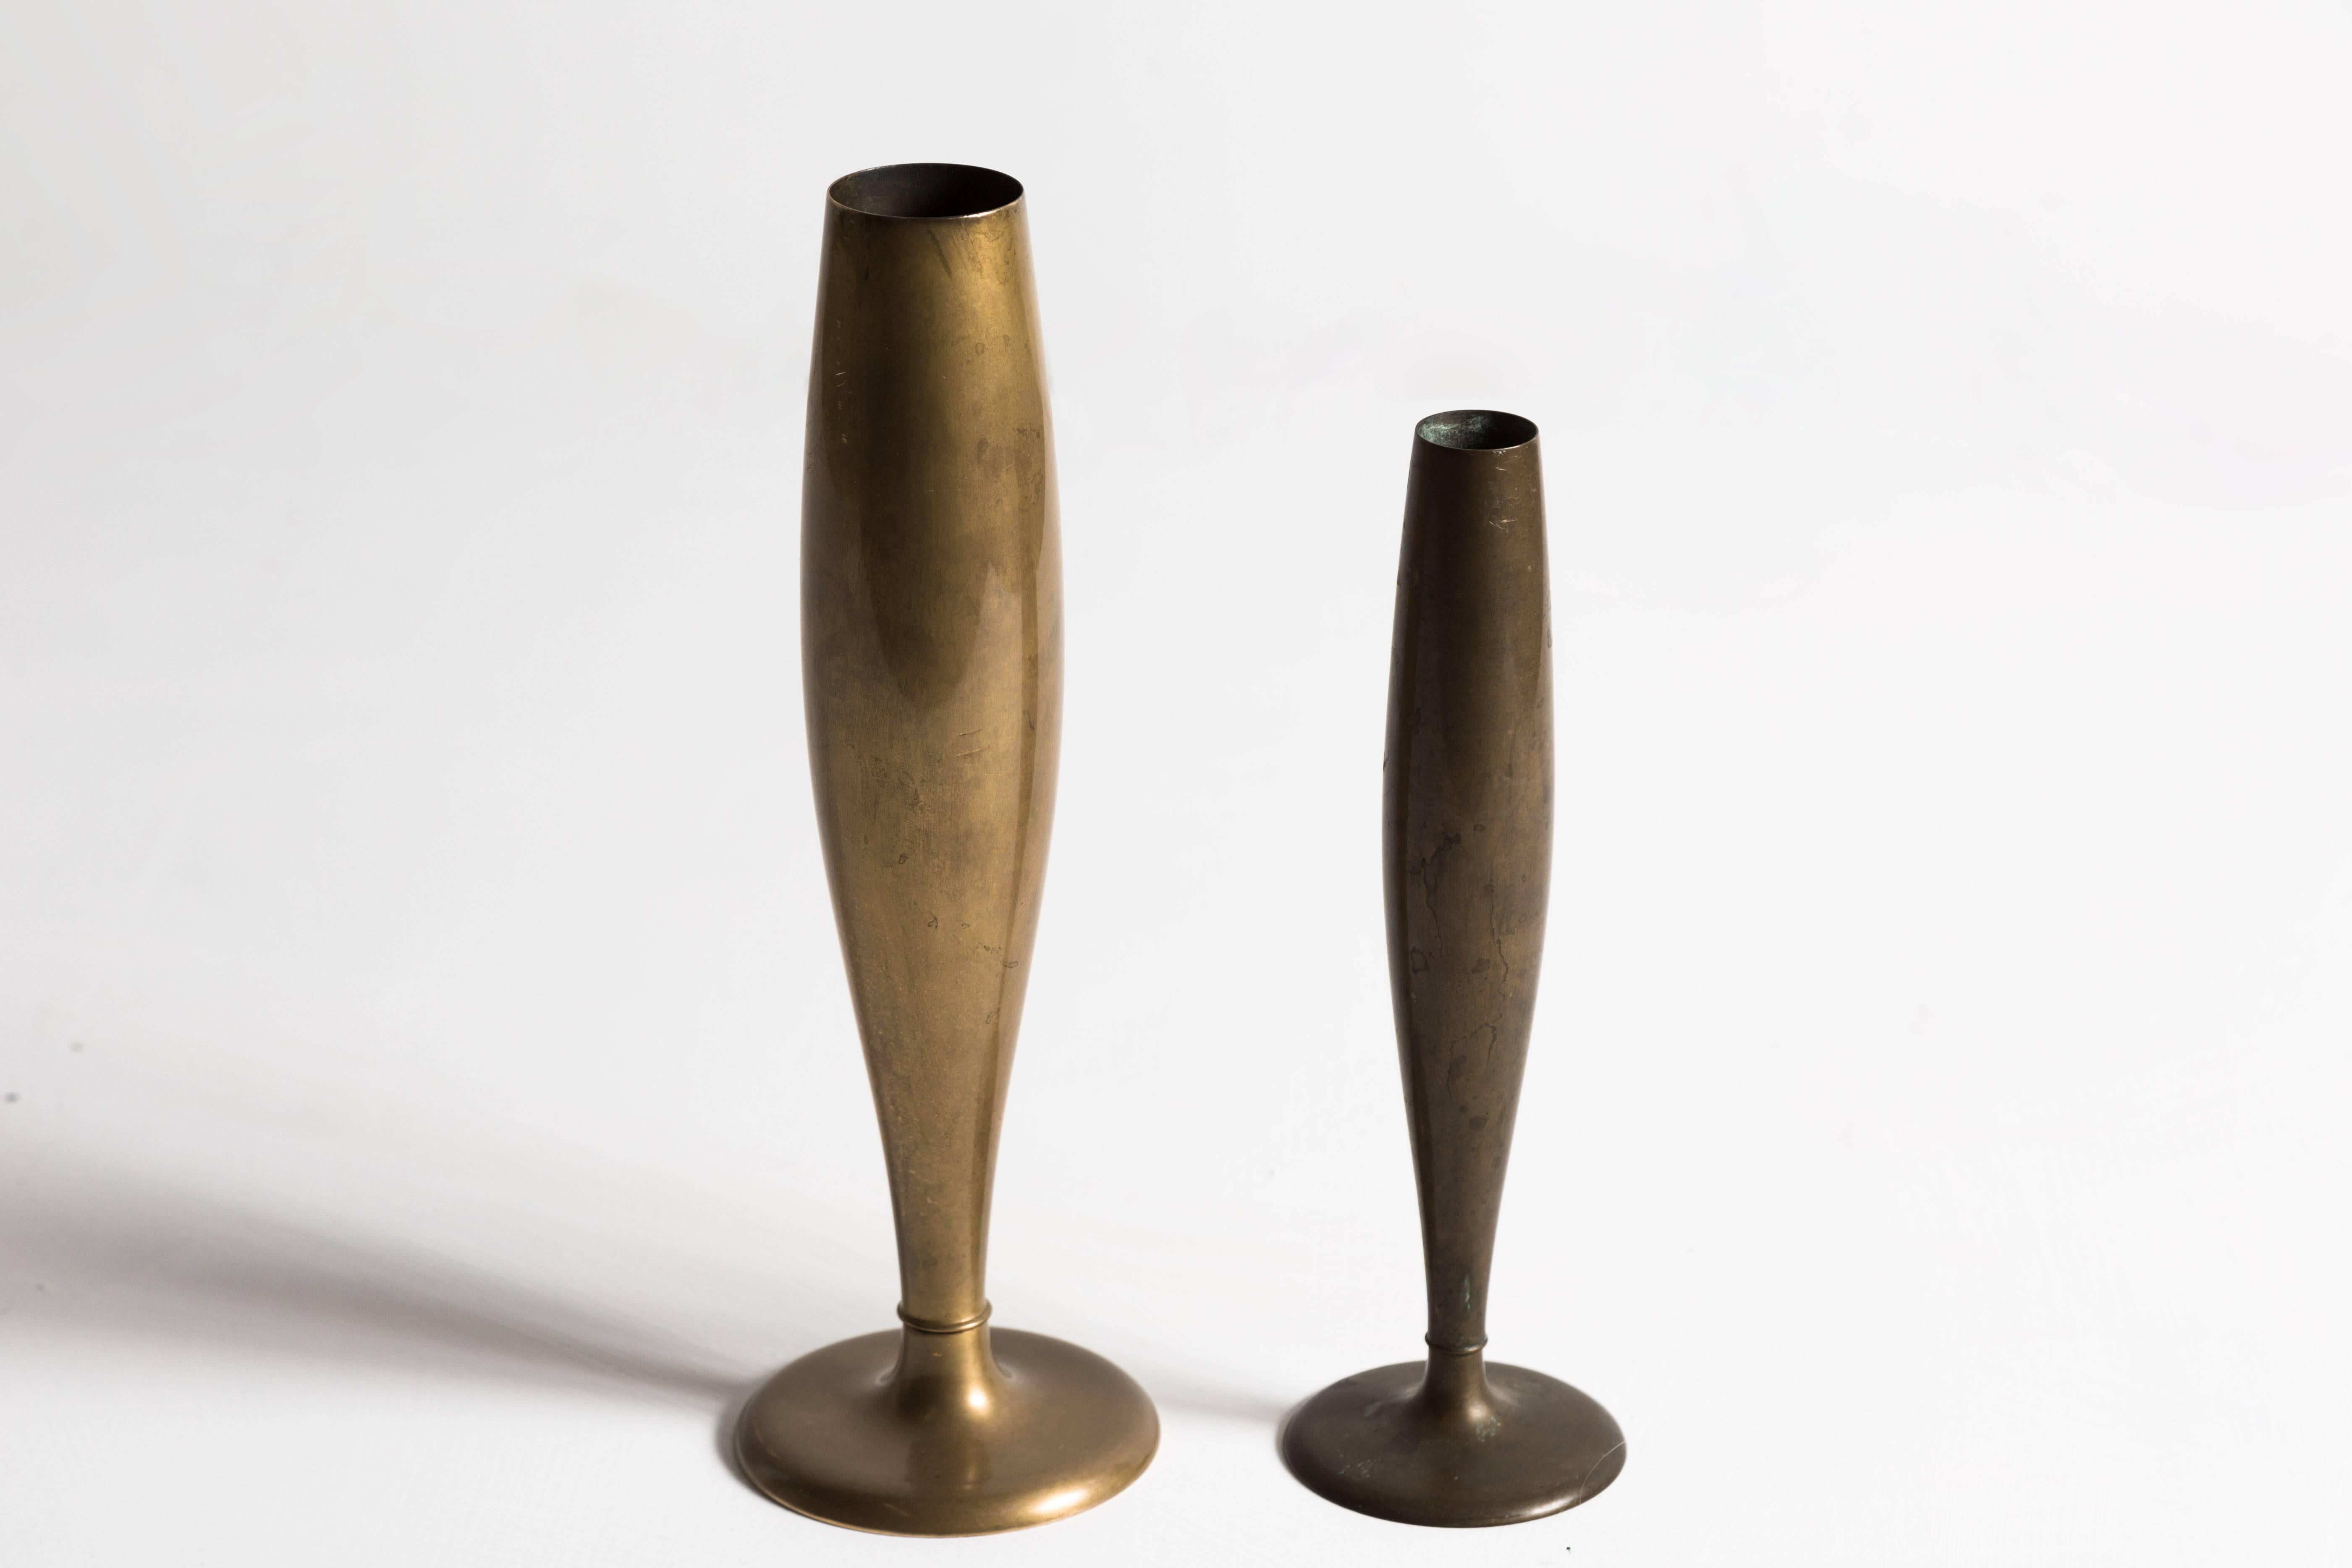 Patinated bronze bud vases marked Dirigold, Made in Sweden, circa 1930s.